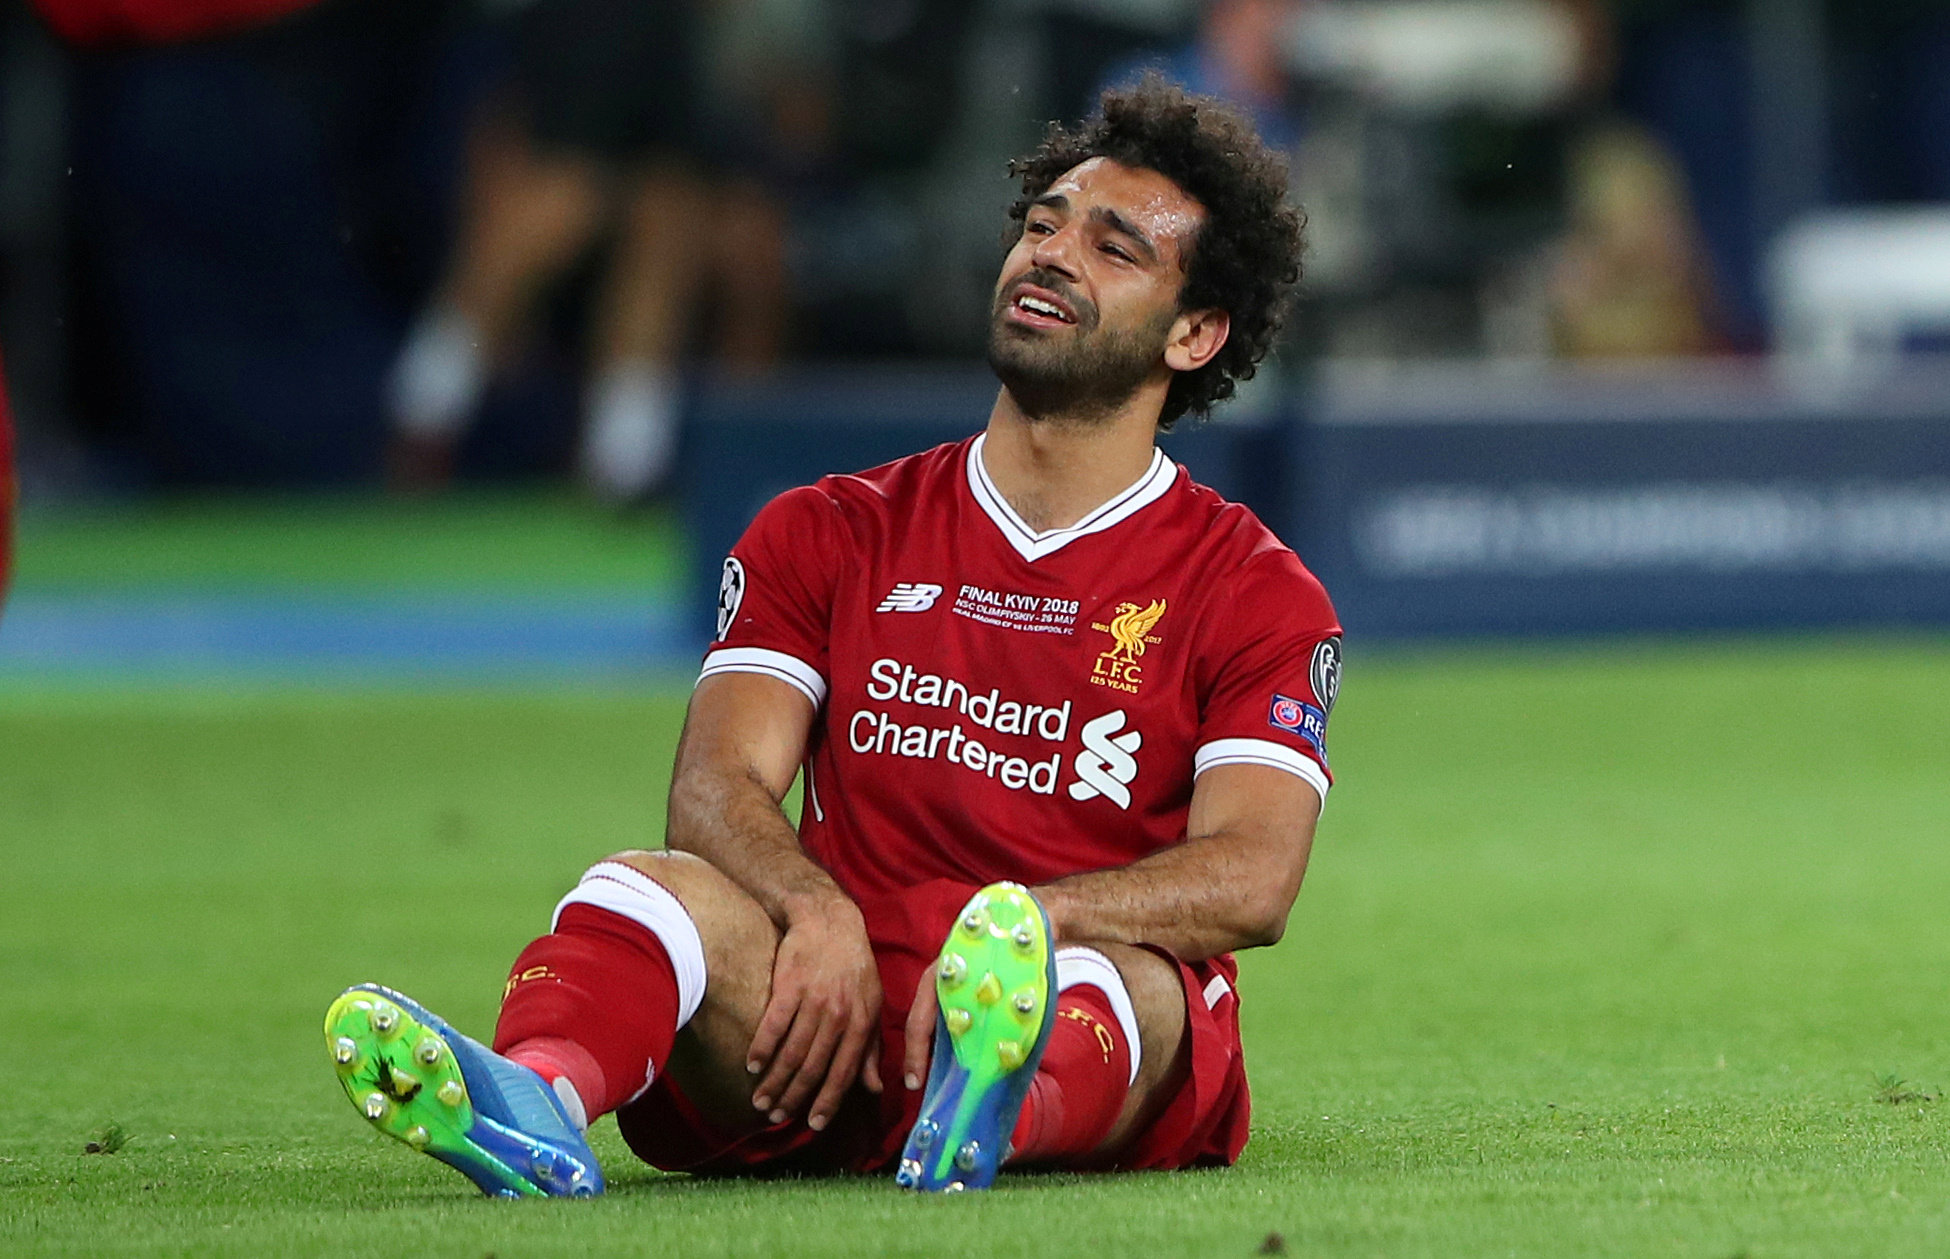 Football: Salah 'confident' of being fit for World Cup